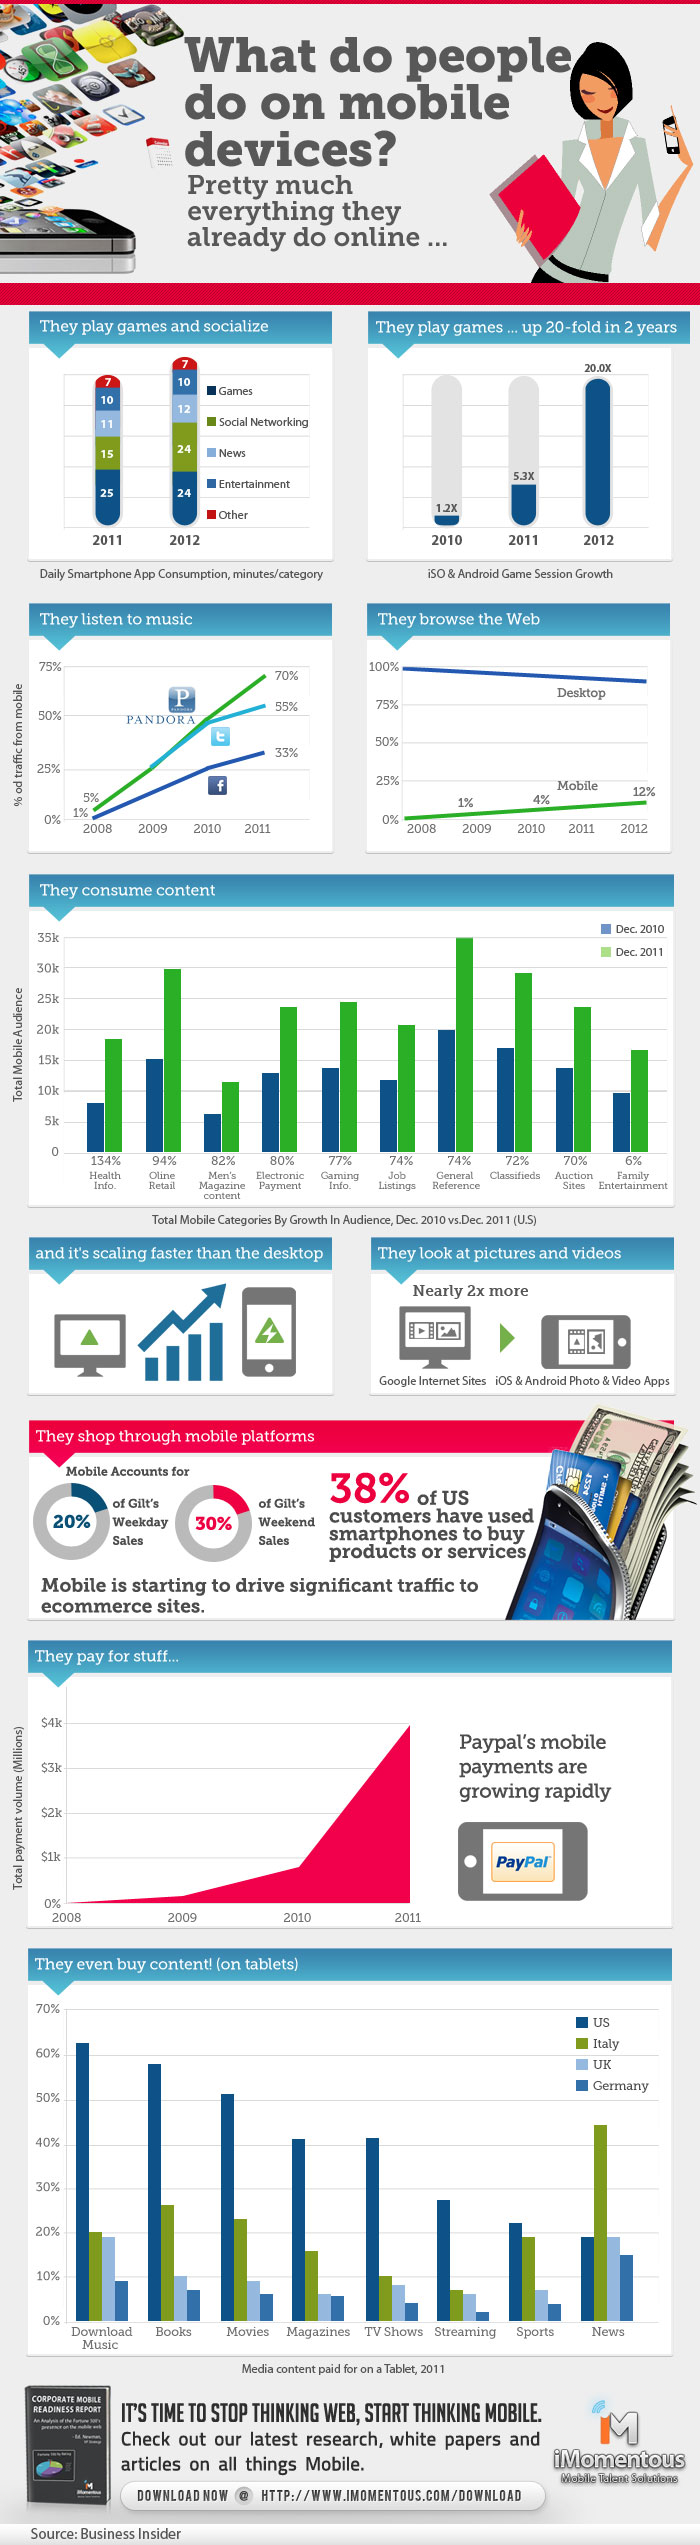 What do people do on mobile devices?